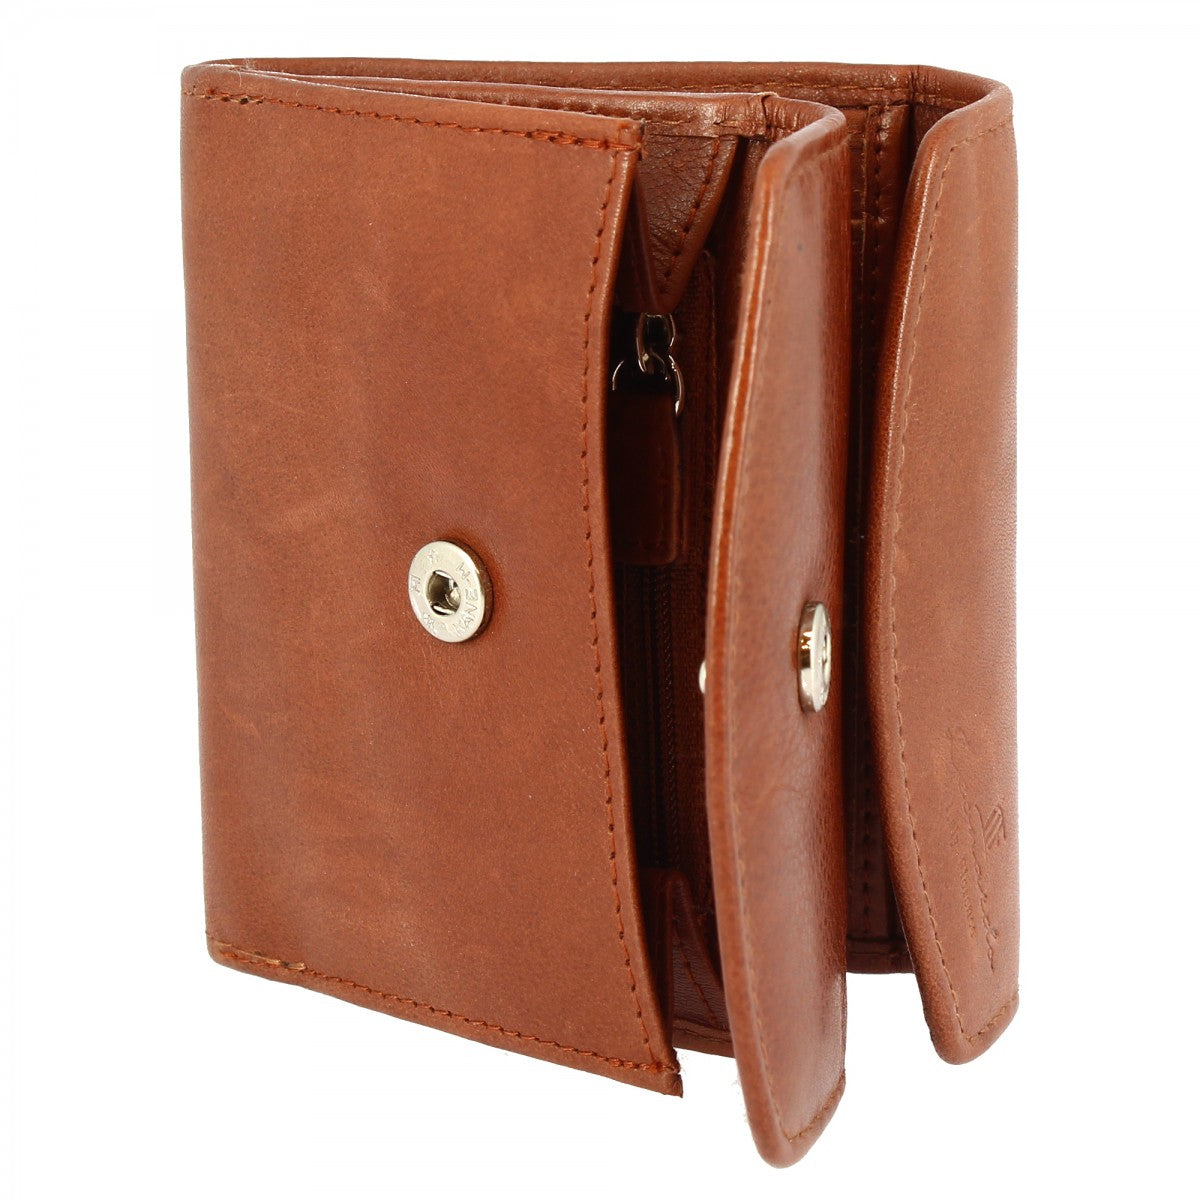 Women's wallet sauvage handmade leather card holder banknote compartments